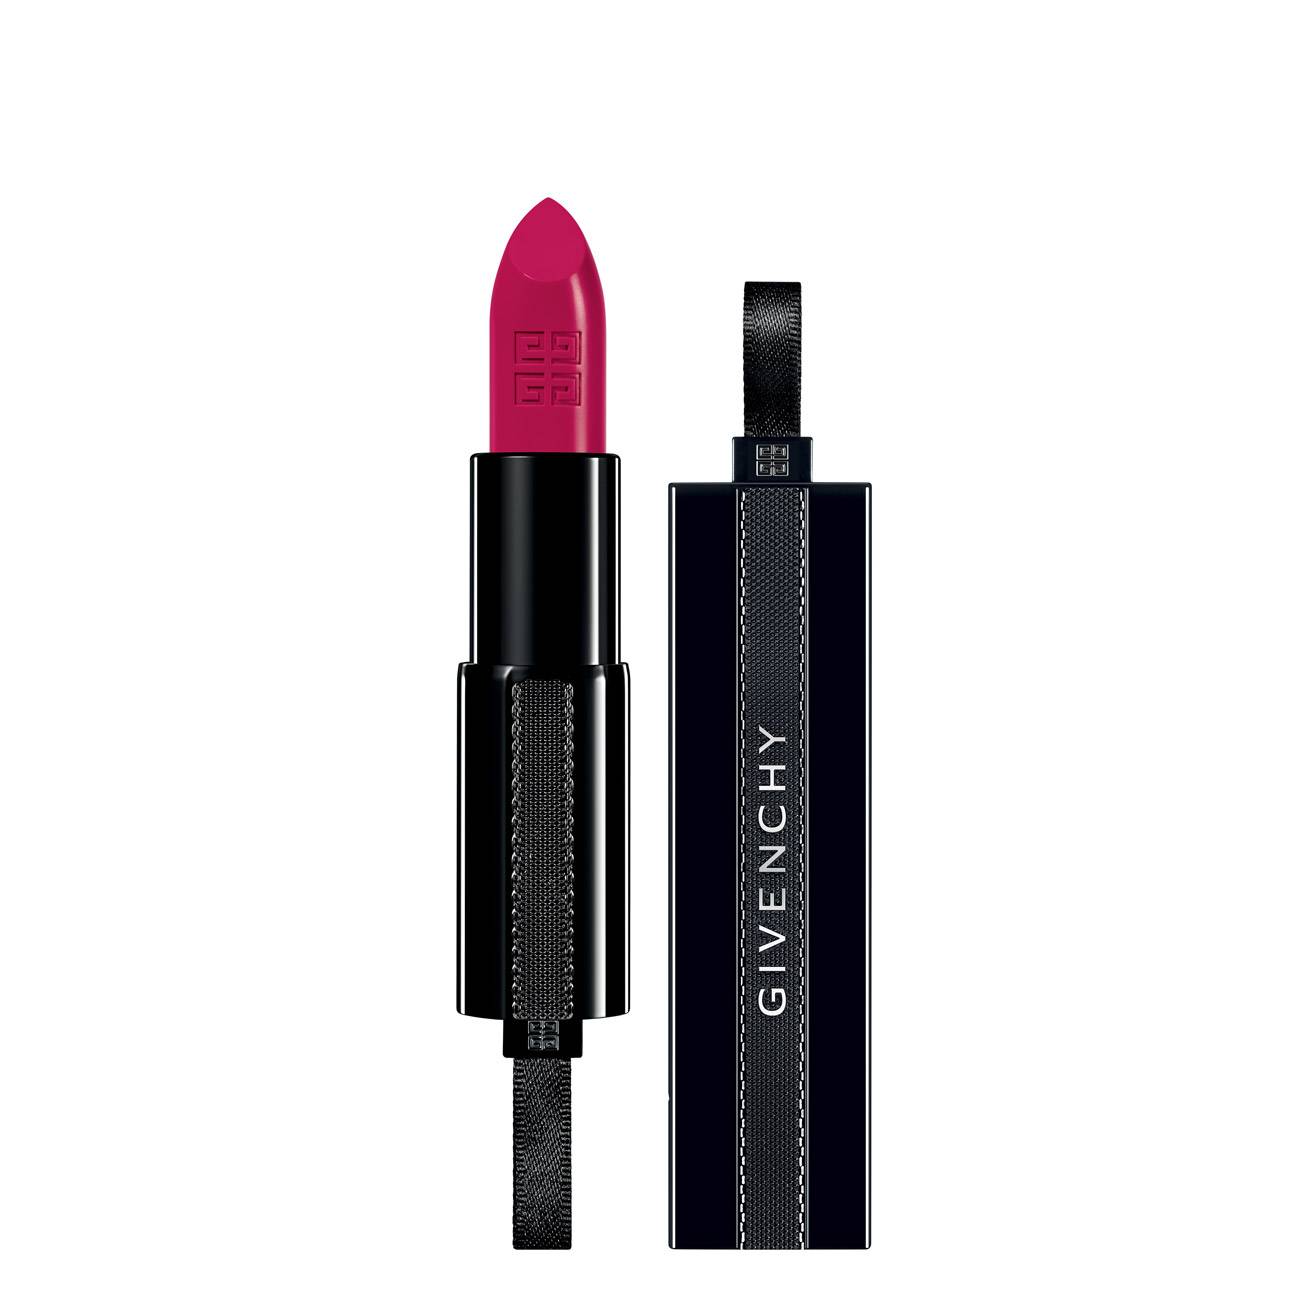 Ruj Givenchy ROUGE INTERDIT 02 3.4 G FUCHSIA IN THE KNOW 23 cu comanda online